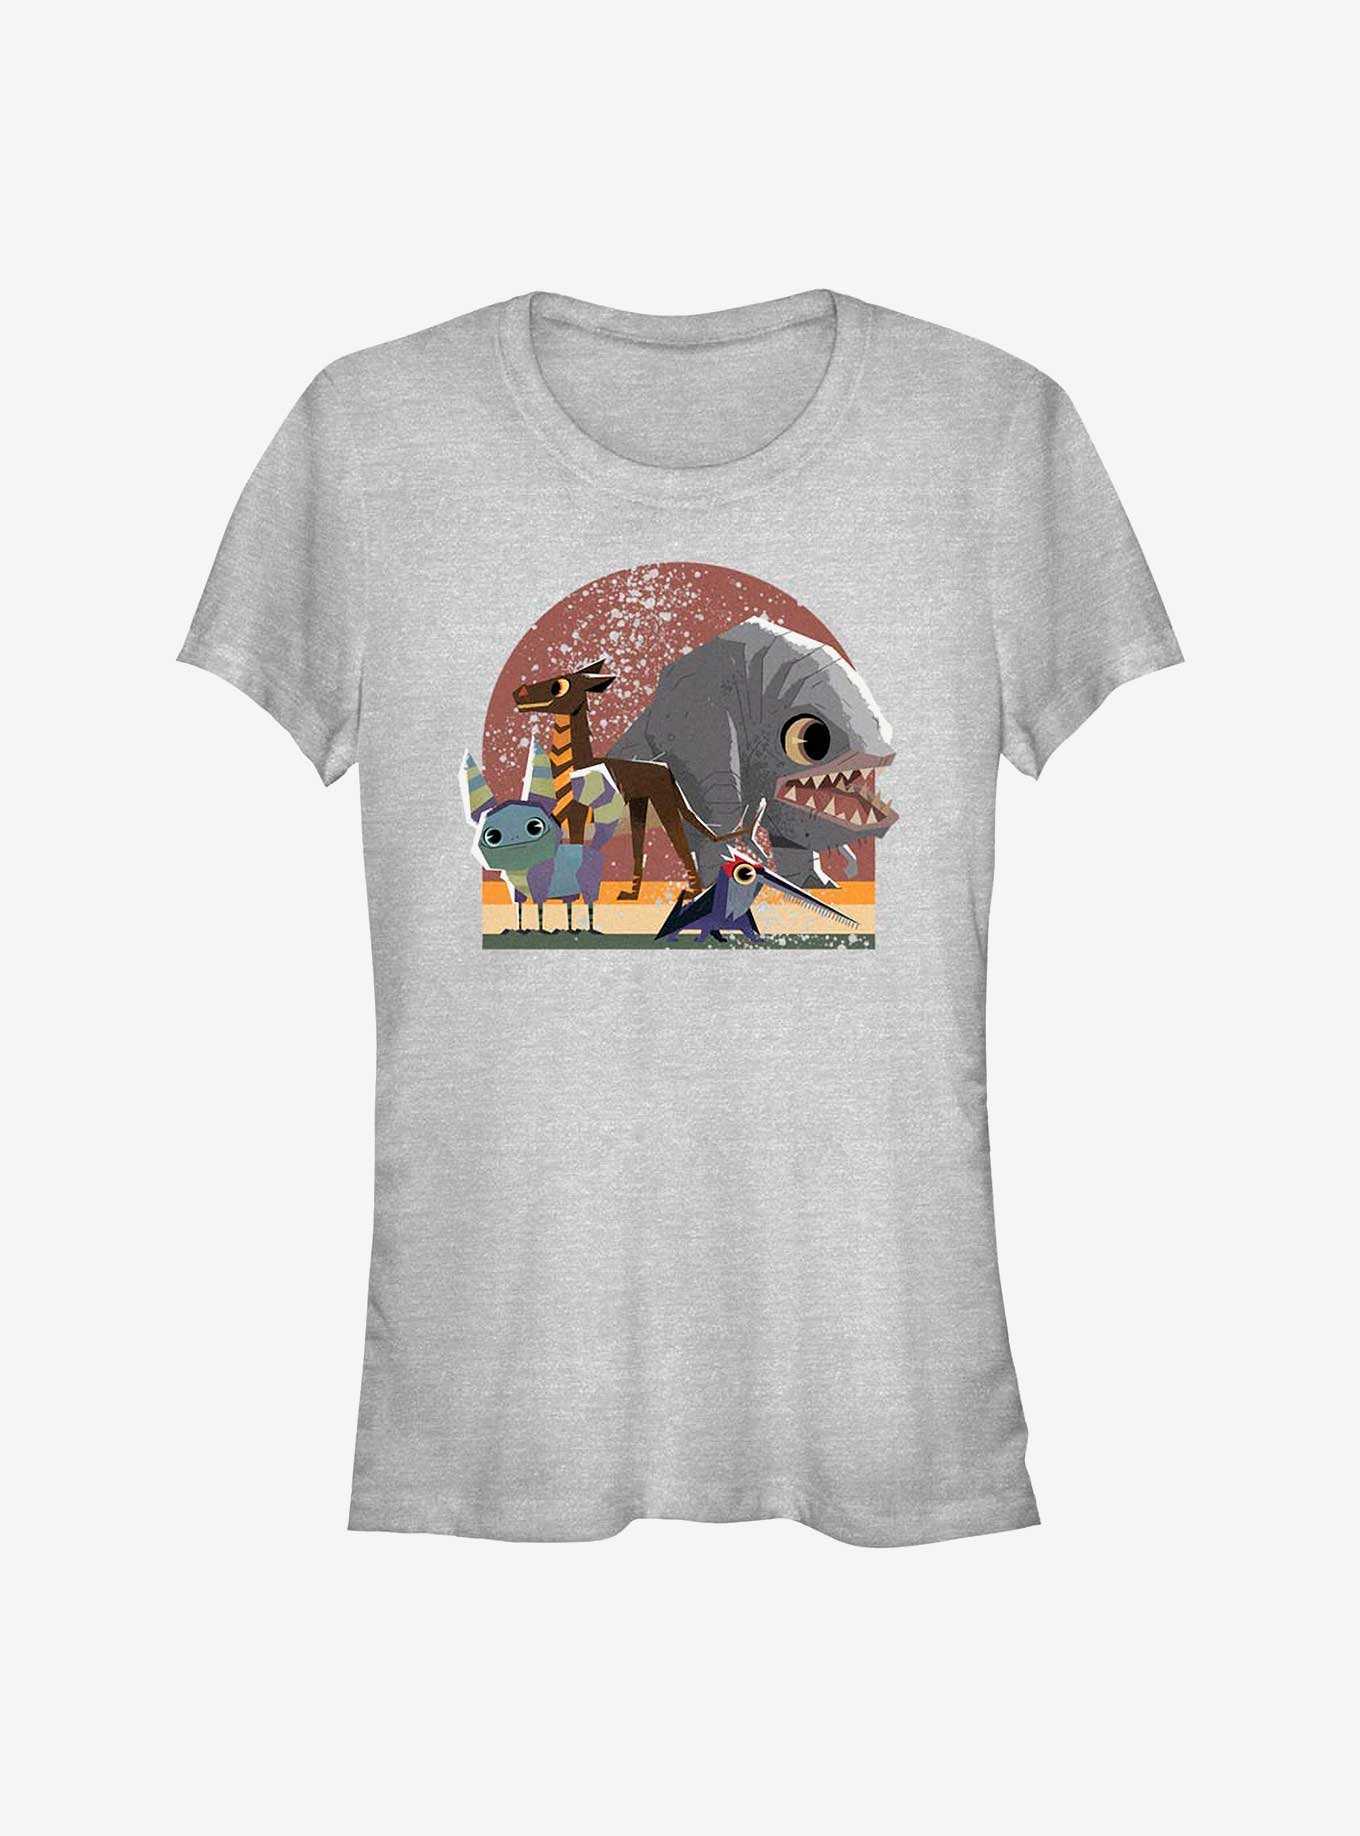 Star Wars: Galaxy Of Creatures Creature Group Girls T-Shirt, , hi-res